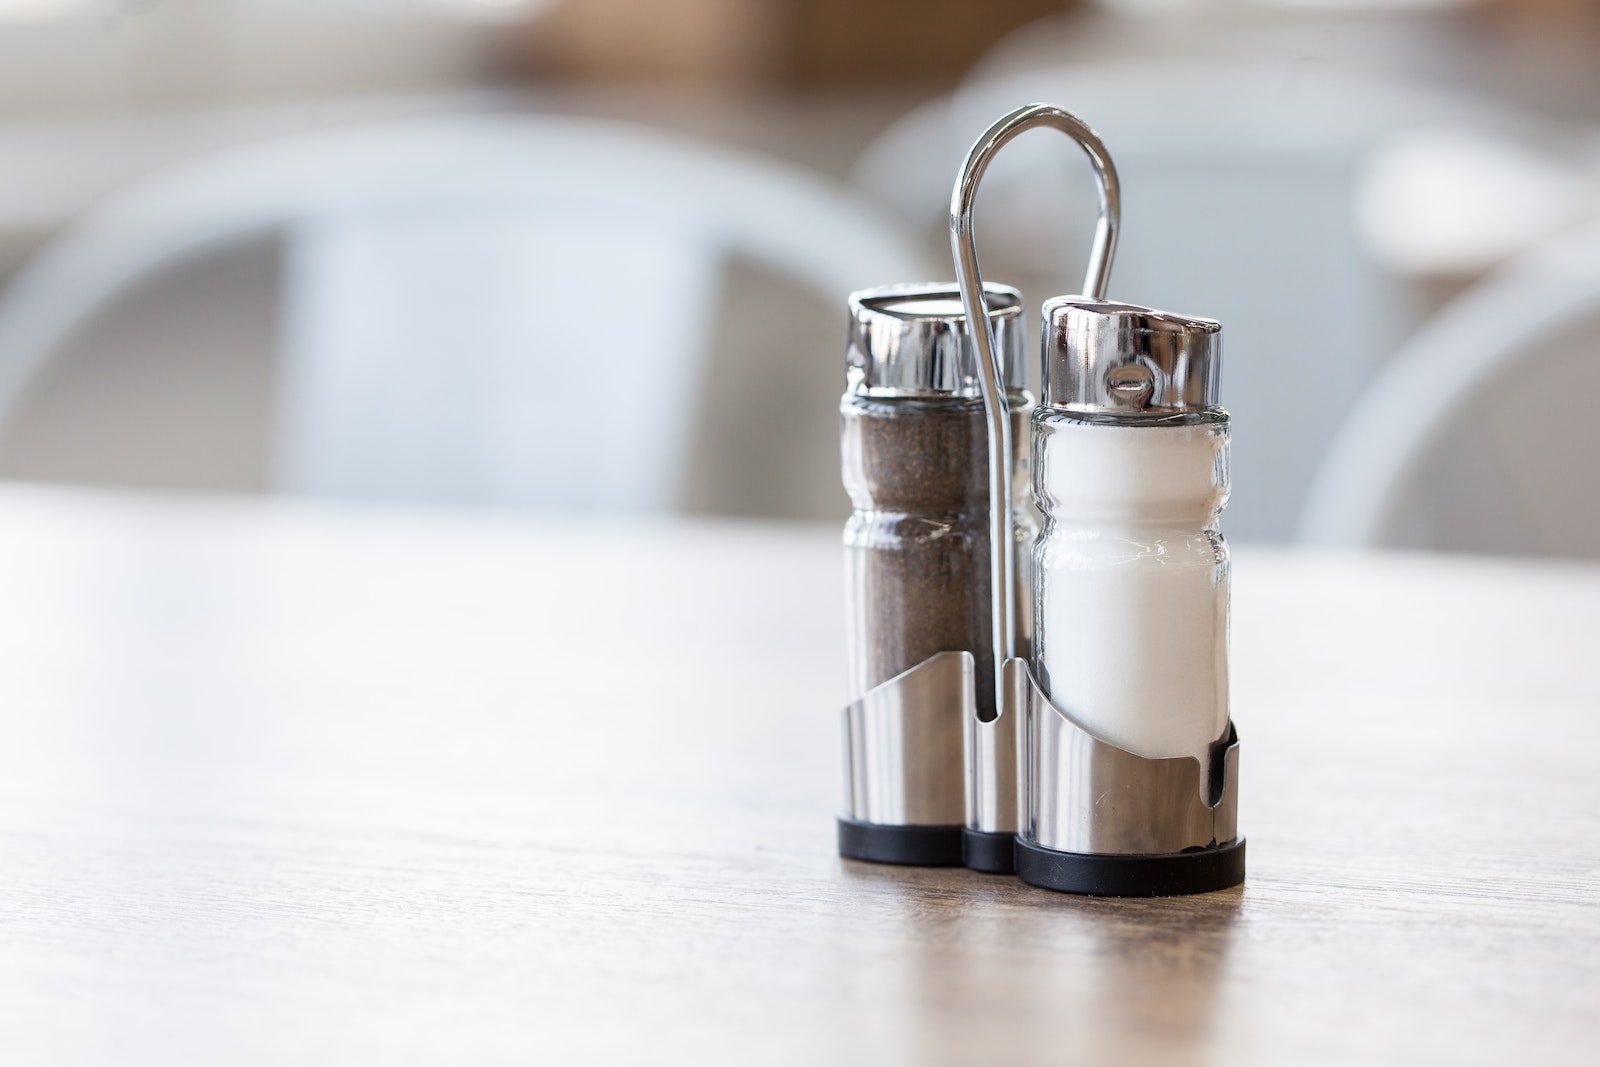 Salt and pepper shakers in holder on table